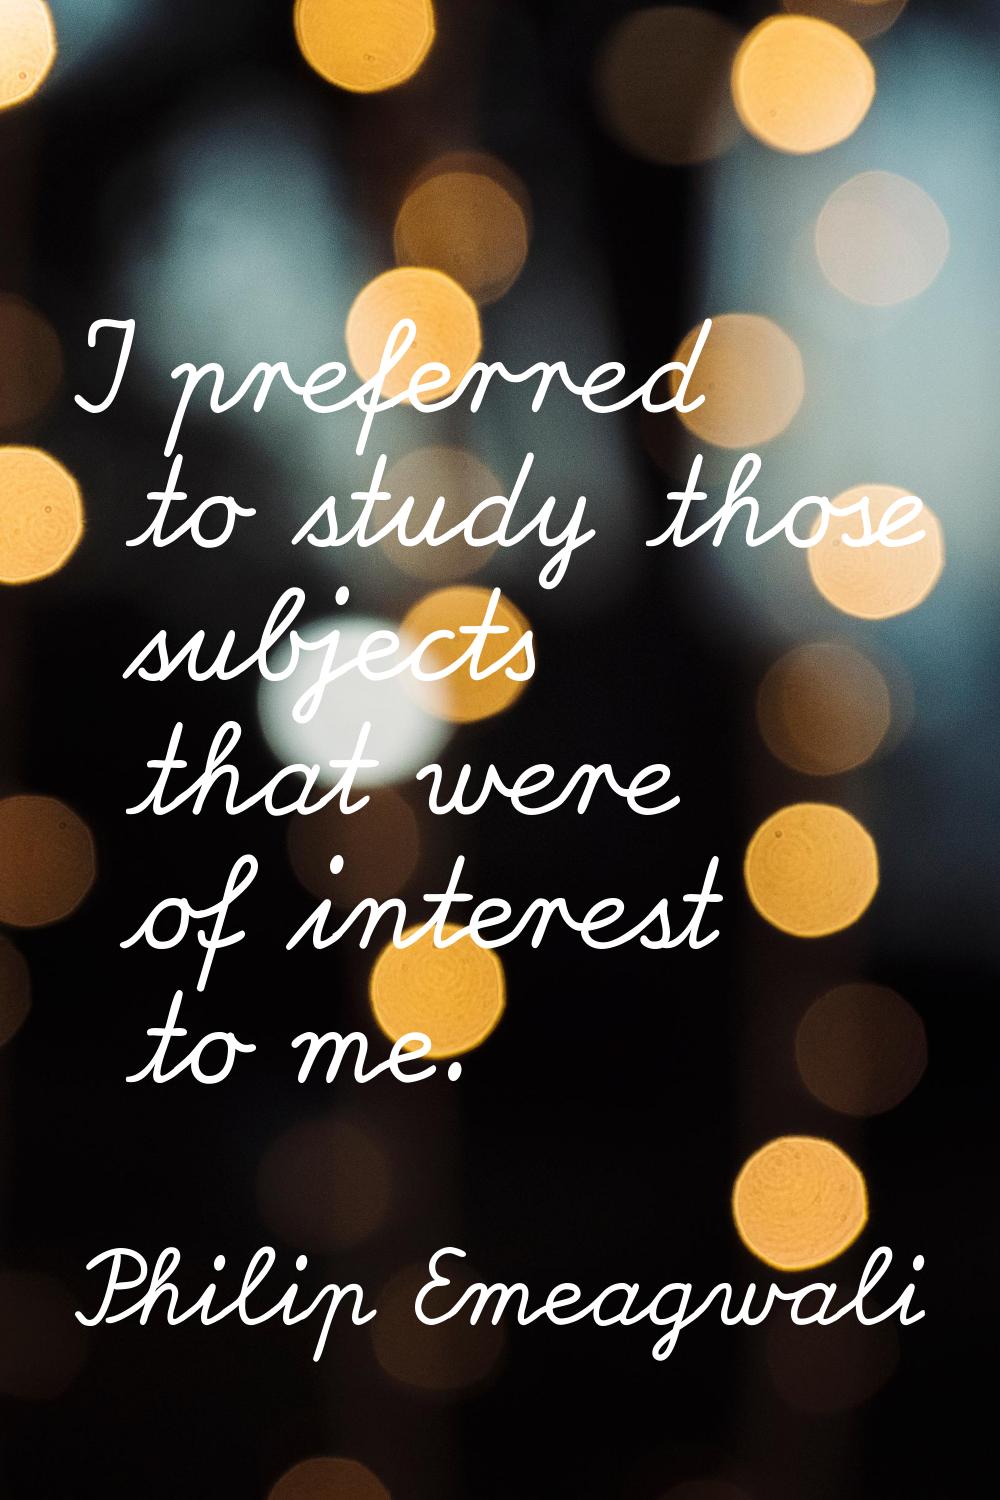 I preferred to study those subjects that were of interest to me.